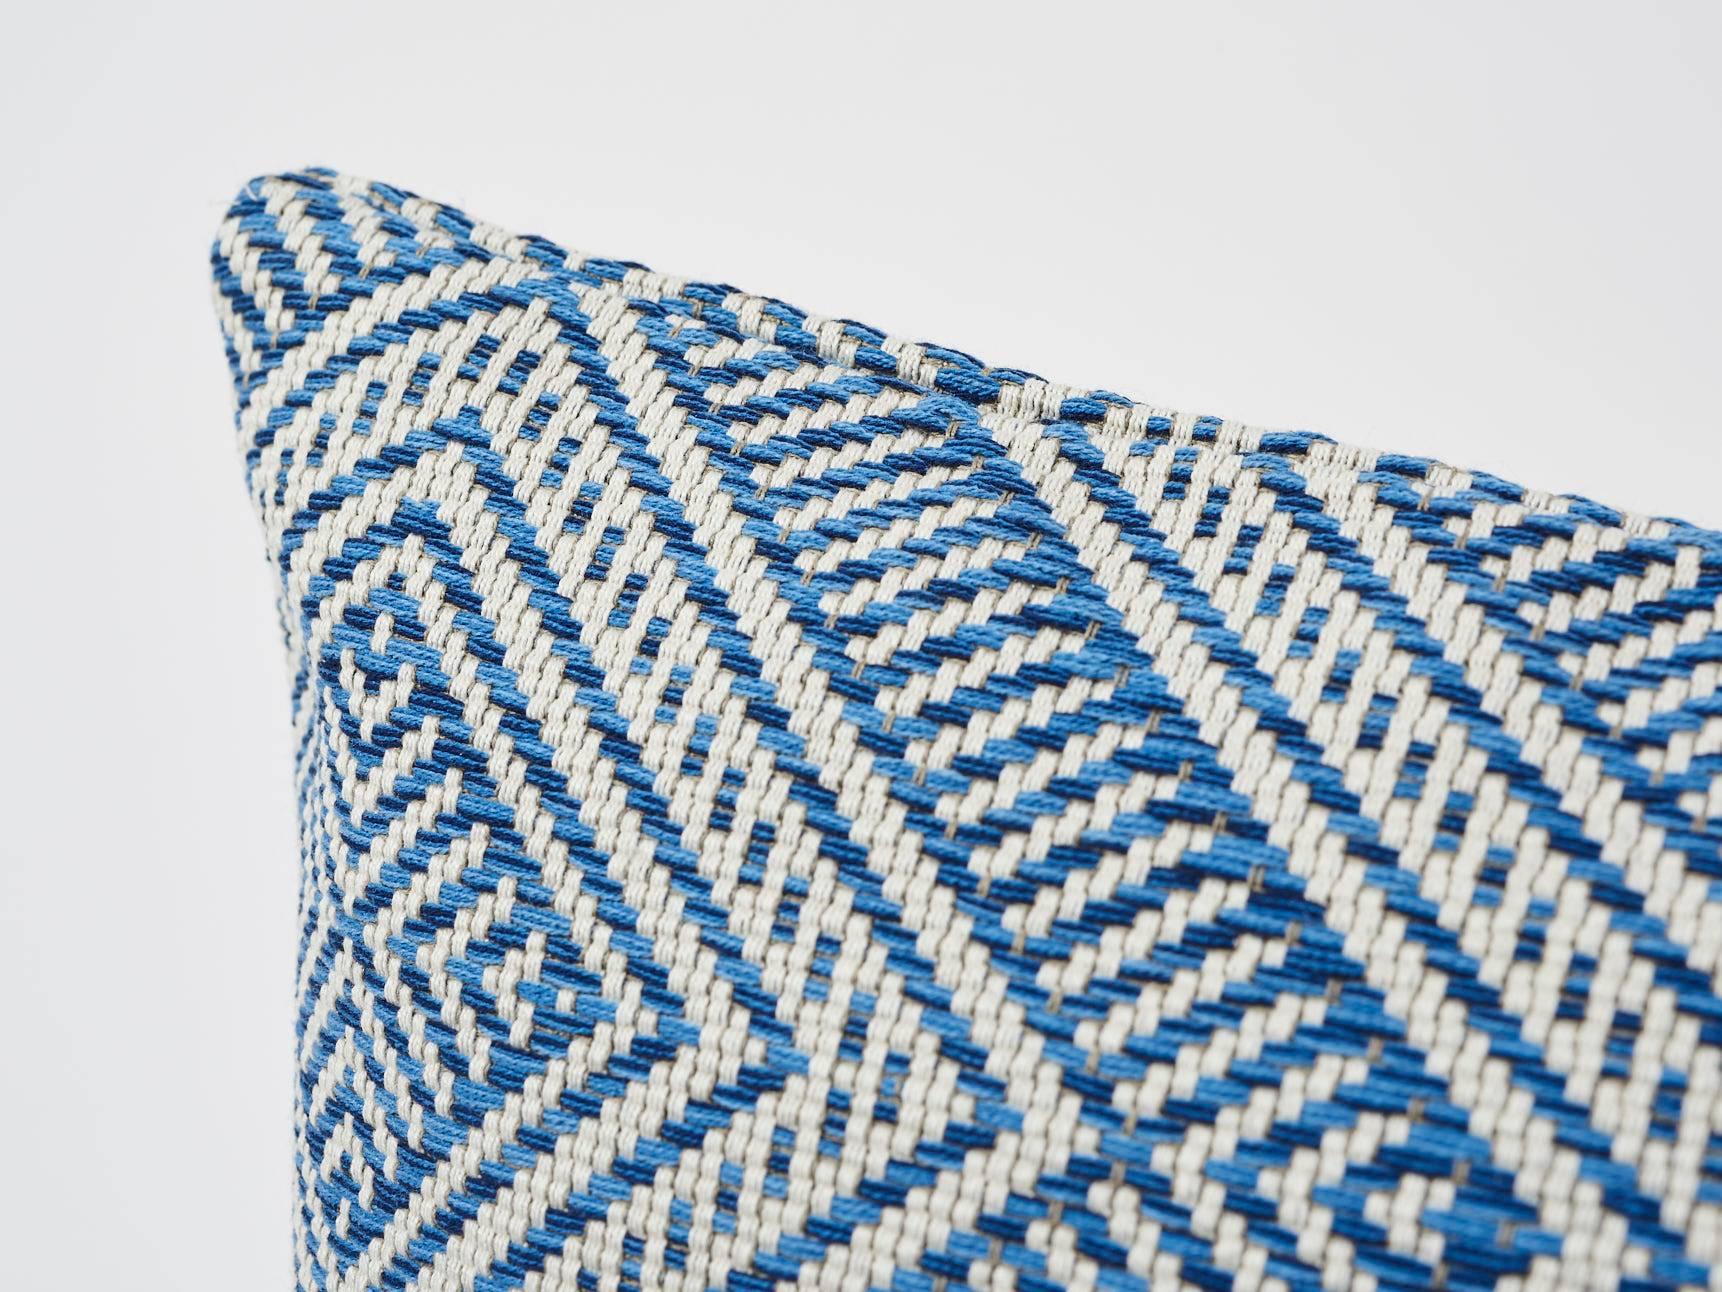 Inspired by basket designs, this concentric diamond pattern is woven from Dralon acrylic yarns. Textured and extremely durable, it is suitable for both indoor or outdoor decor settings. Finished in France and originally part of our C√¥te d'Azur